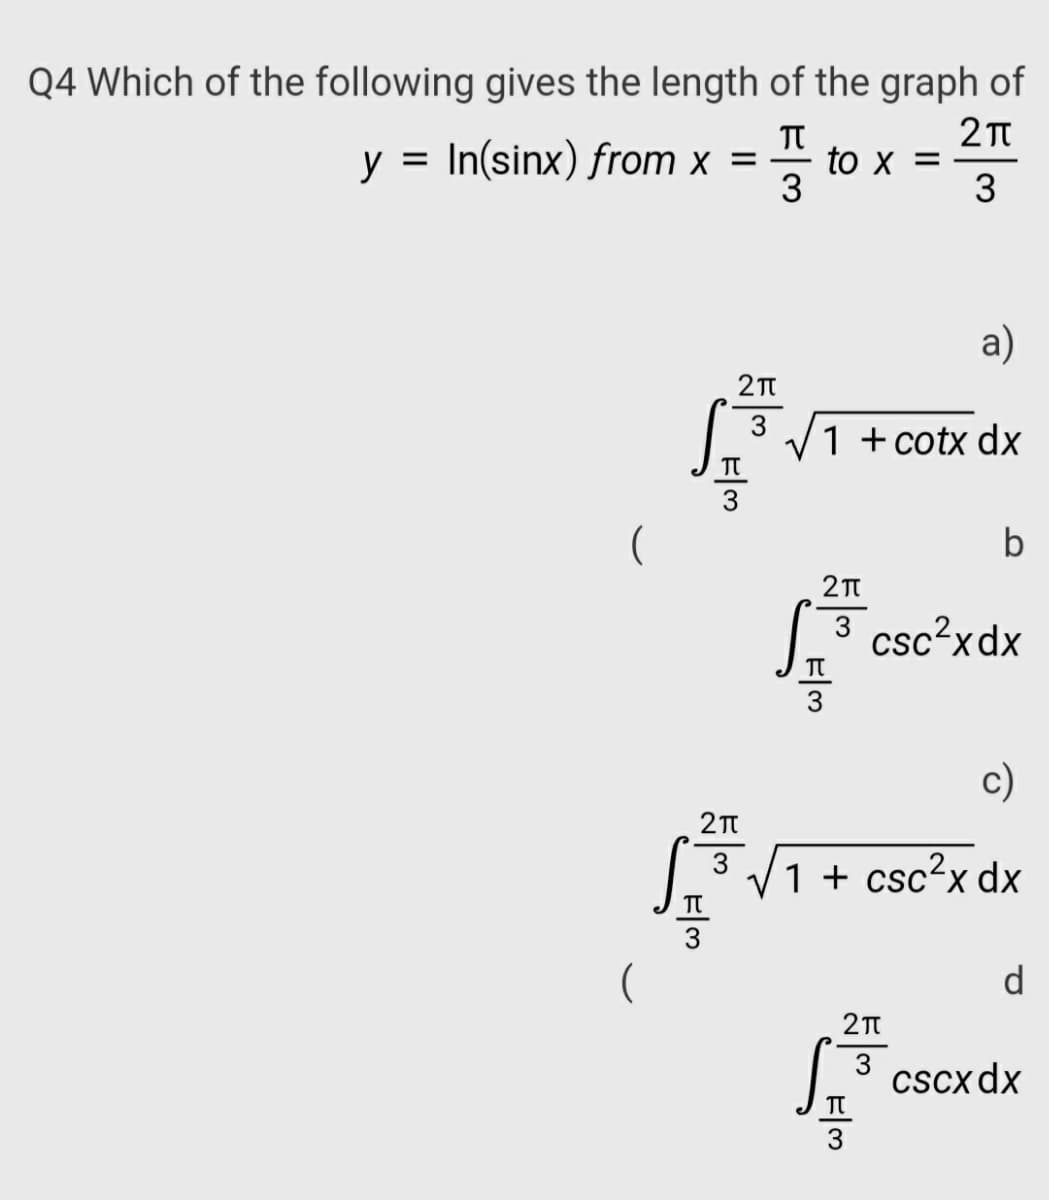 Q4 Which of the following gives the length of the graph of
y = In(sinx) from x =
to x =
3
a)
3
1 +cotx dx
b
3 csc?xdx
TT
c)
3 V1 + csc²x dx
d
3
Cscx dx
